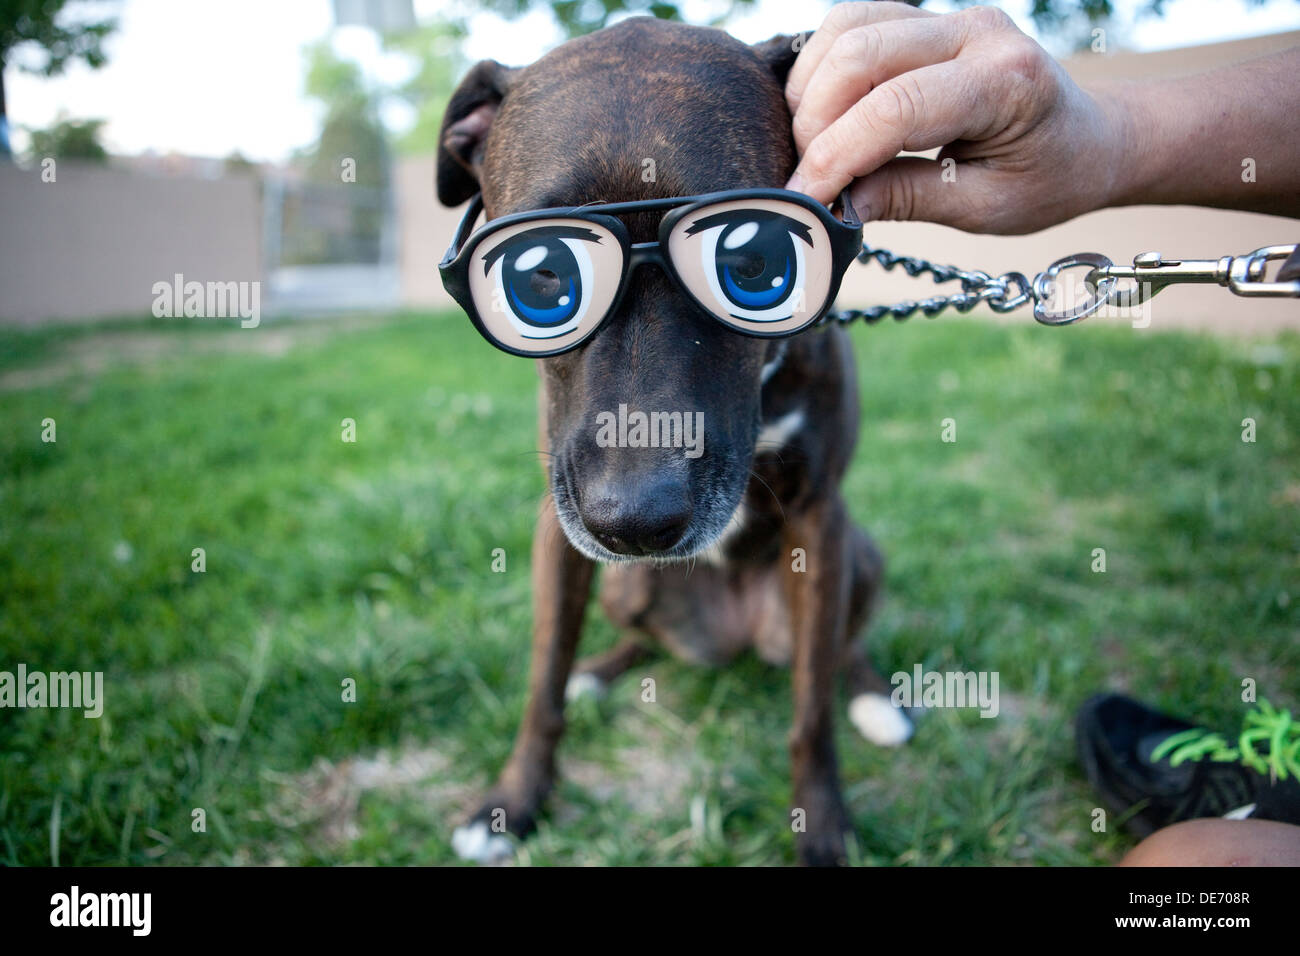 Pet owner placing Animation eye glasses on his dog. Stock Photo